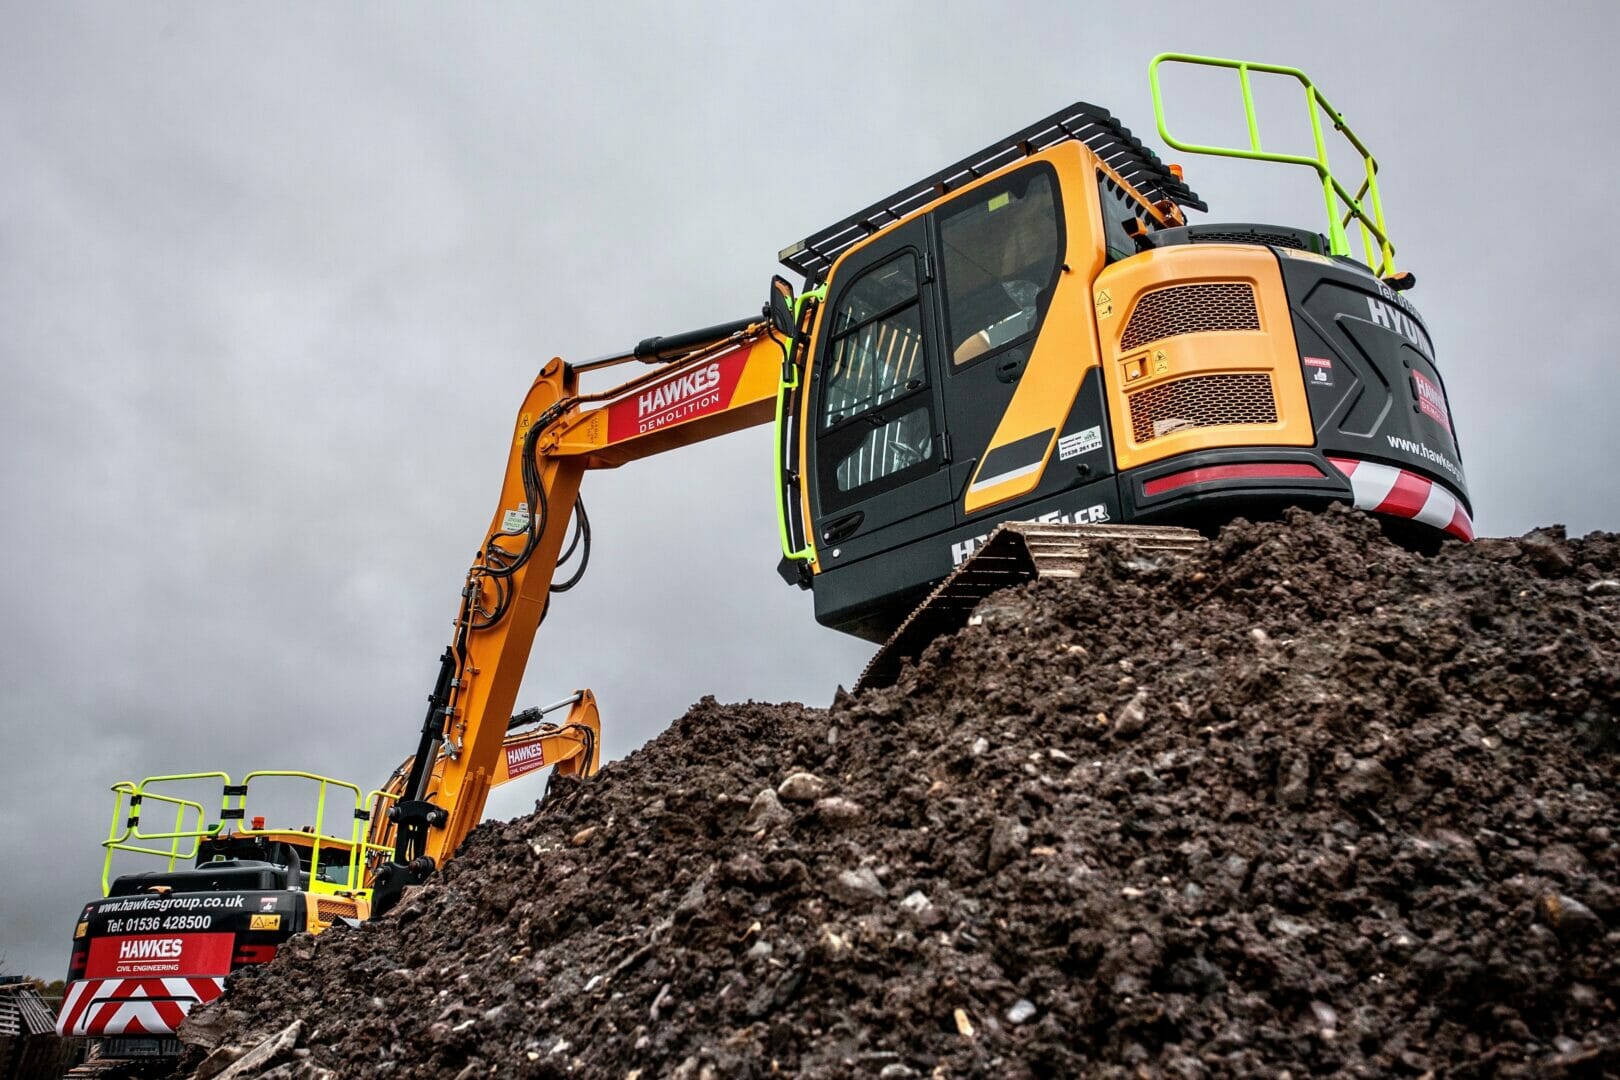 Simply funds three excavators for Hawkes Group   @HawkesGroup